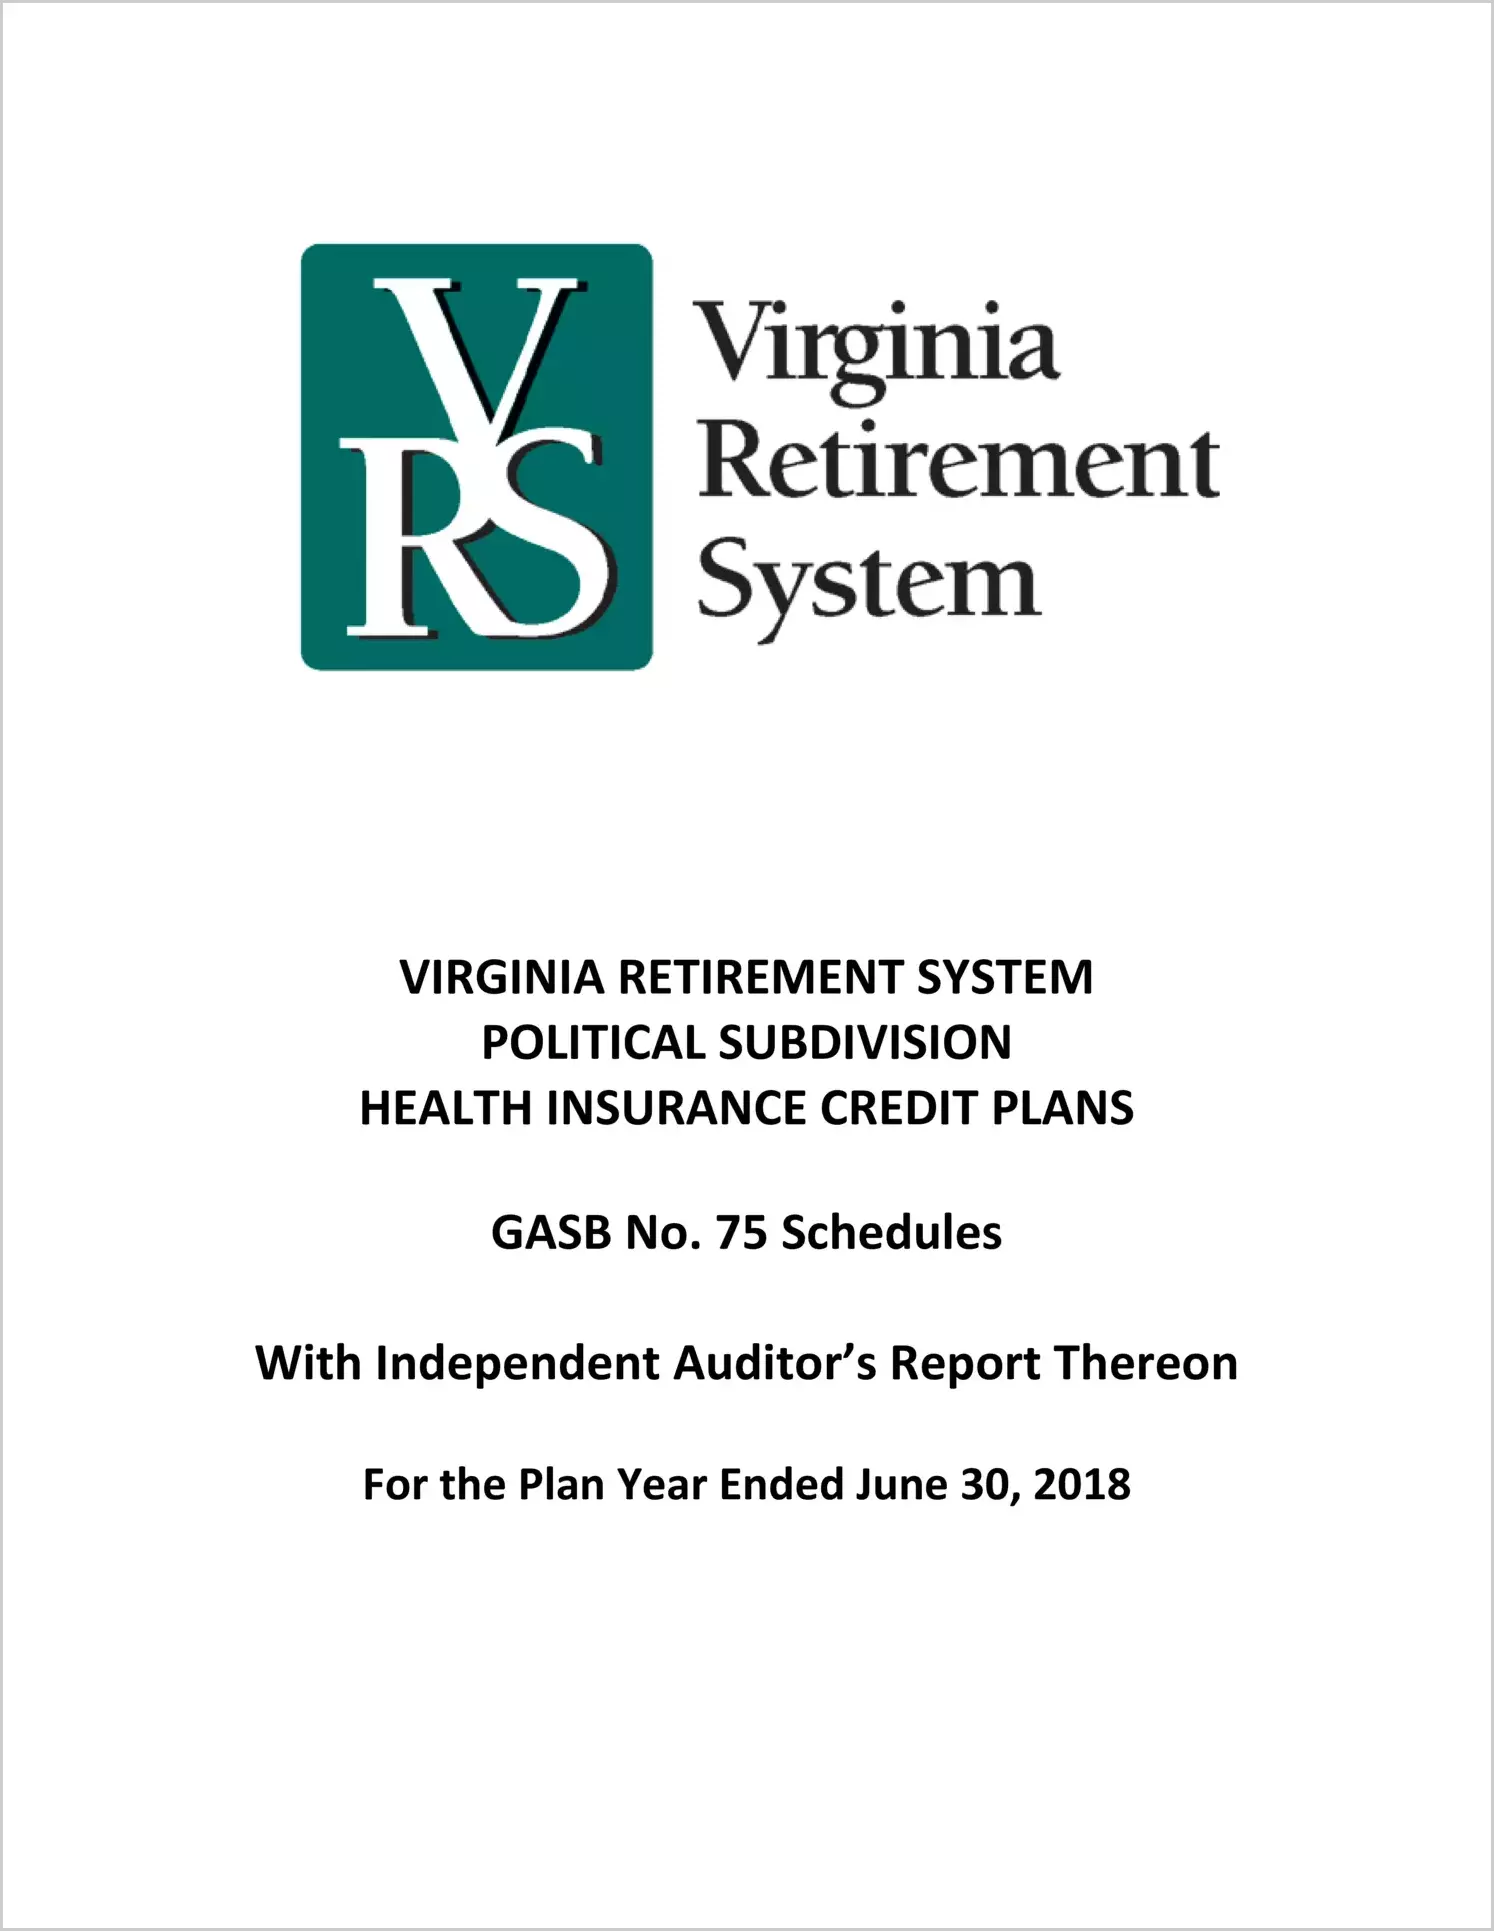 GASB 75 Schedule - Virginia Retirement System Political Subdivision Health Insurance Credit Plans for the plan year ended June 30, 2018